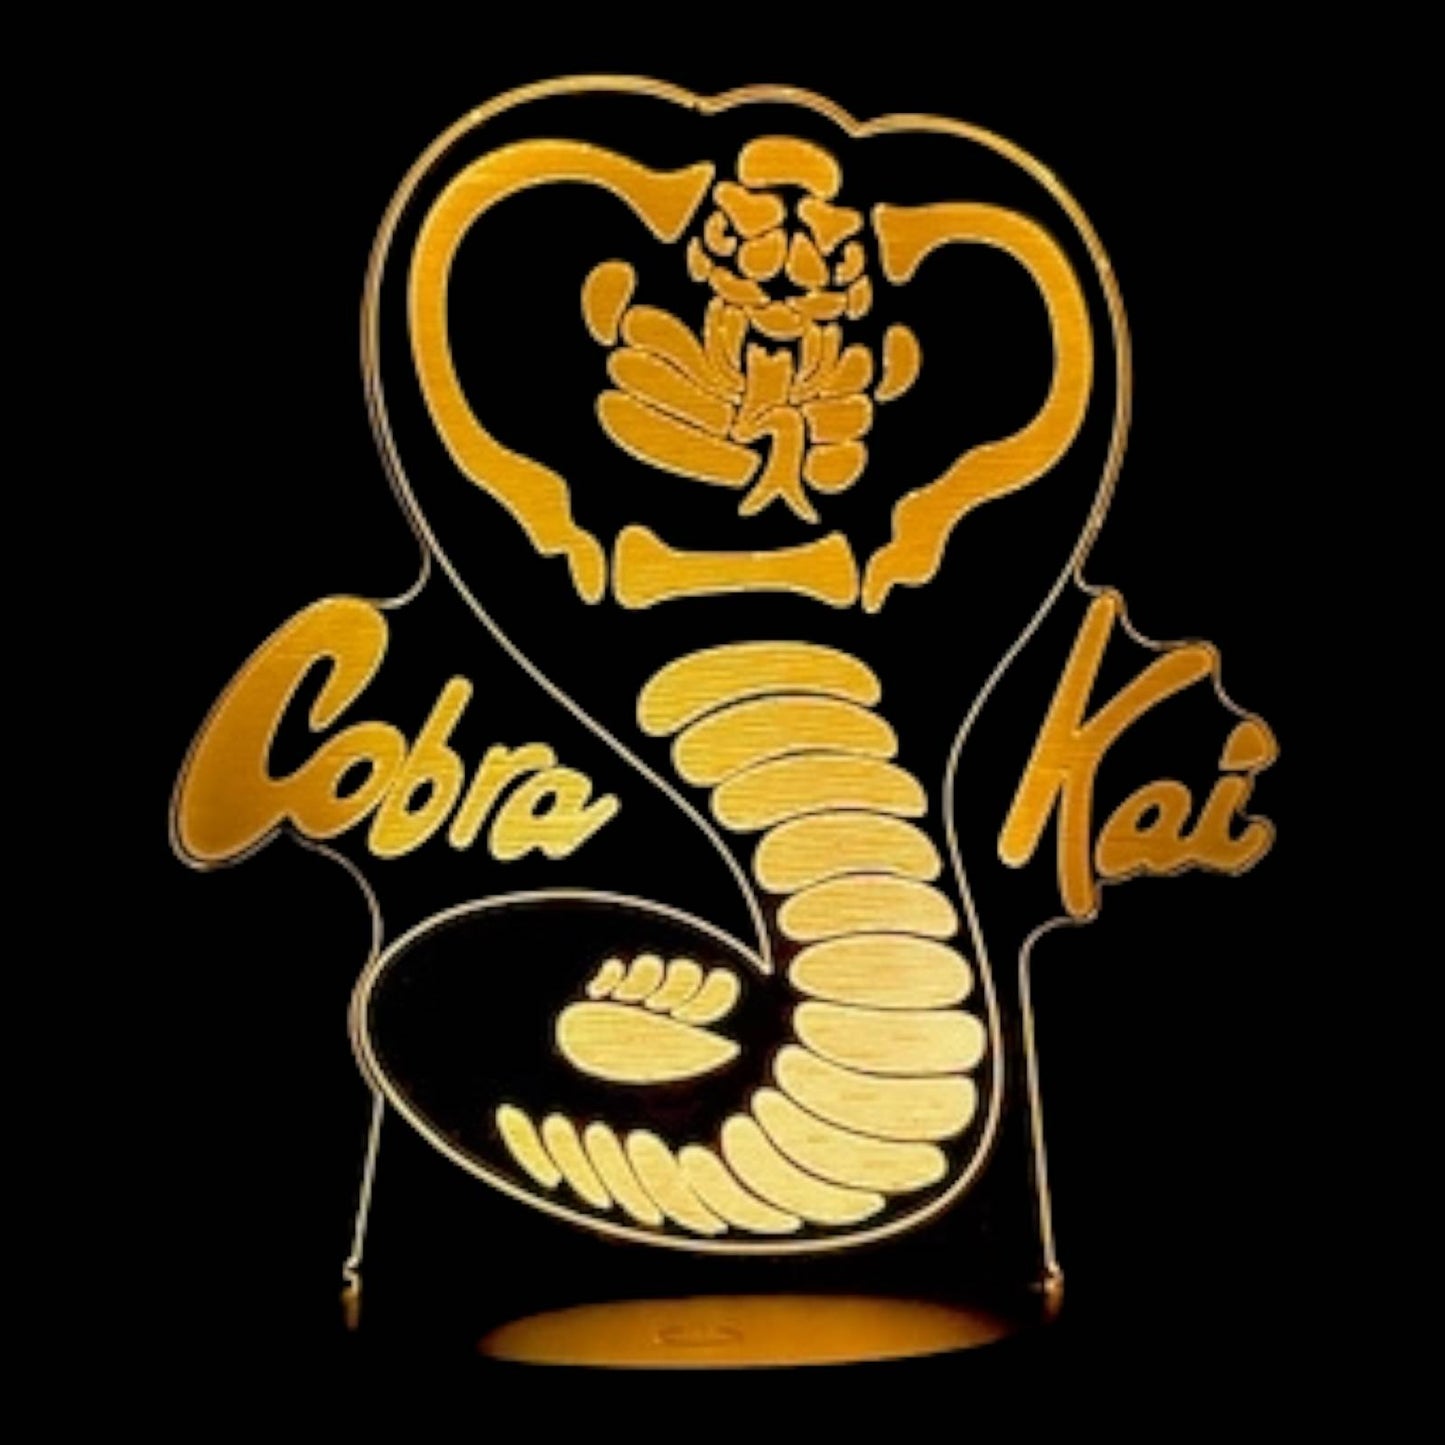 Cobra Kai 3D LED Night-Light 7 Color Changing Lamp w/ Touch Switch